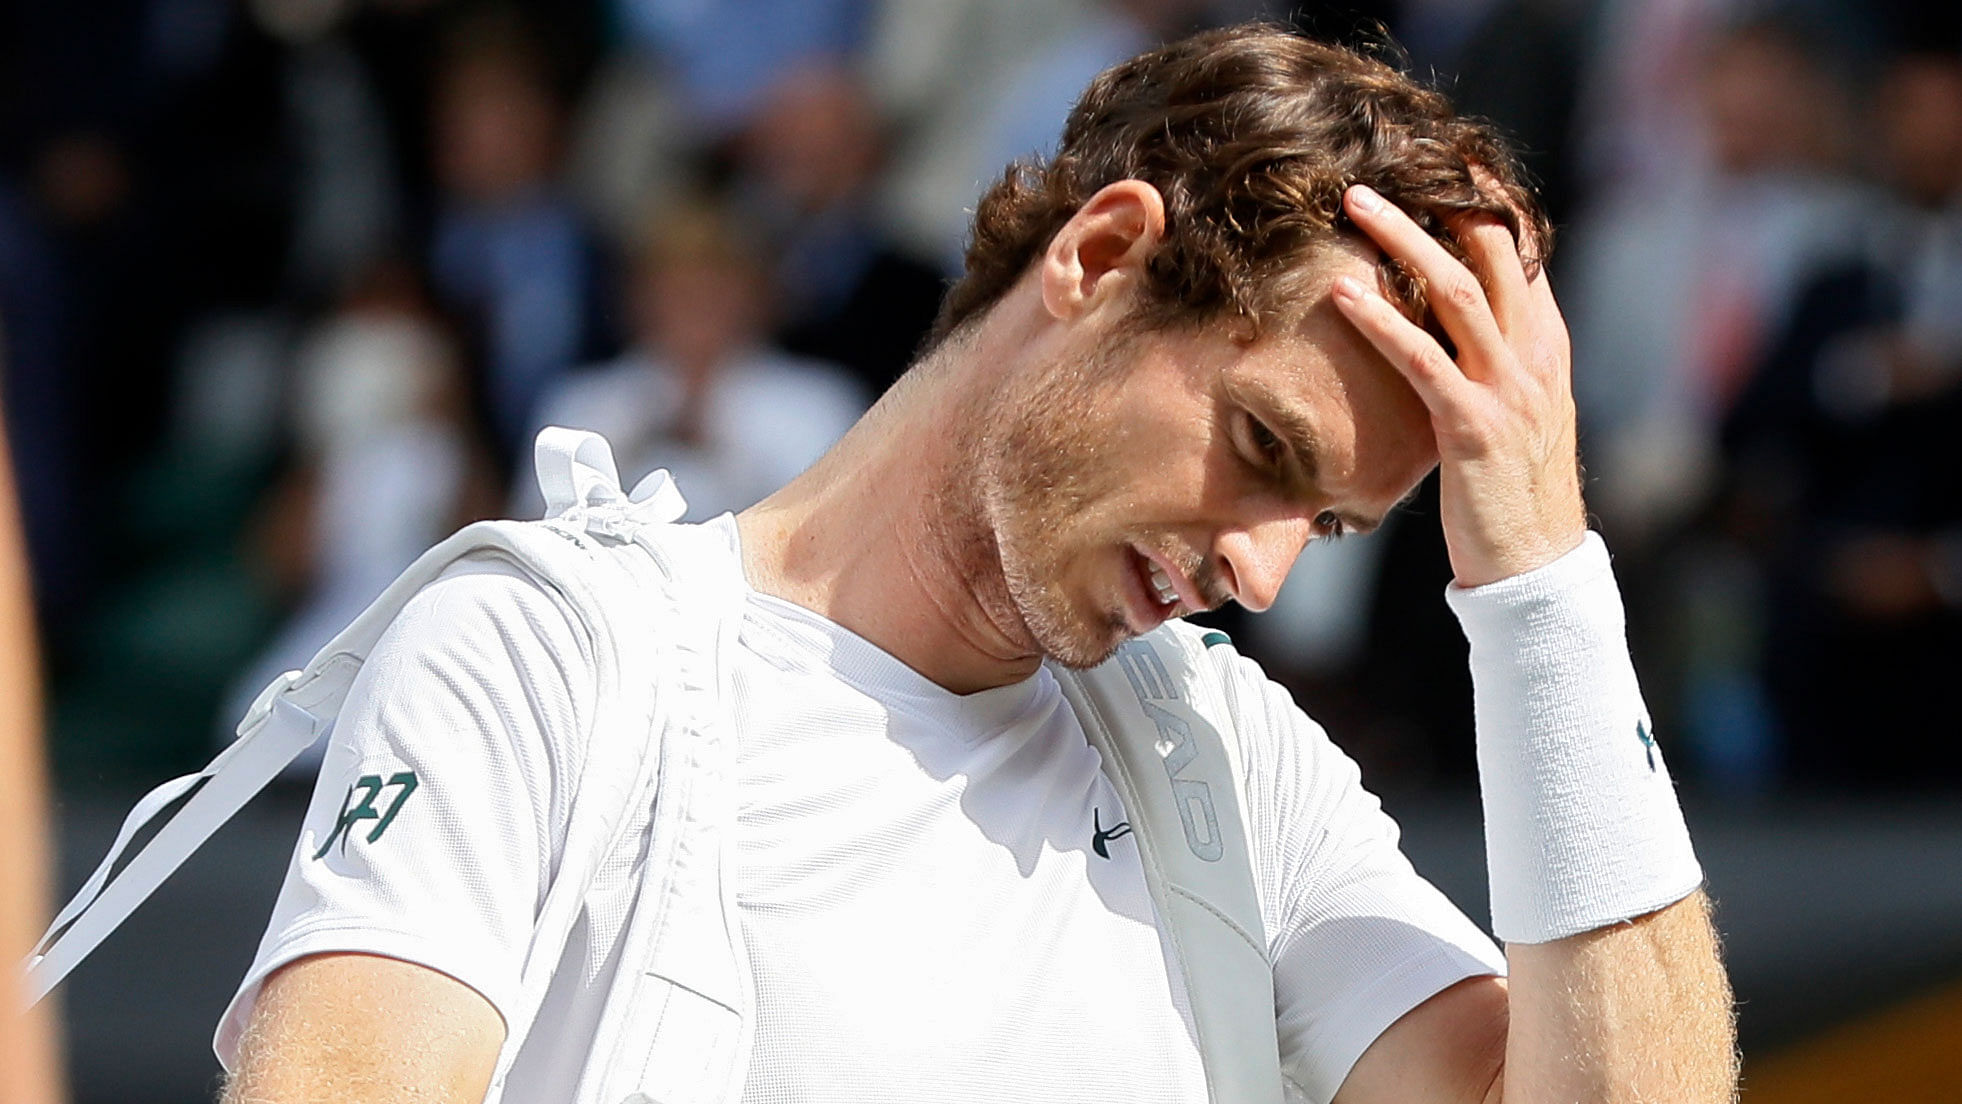 File photo of Andy Murray.